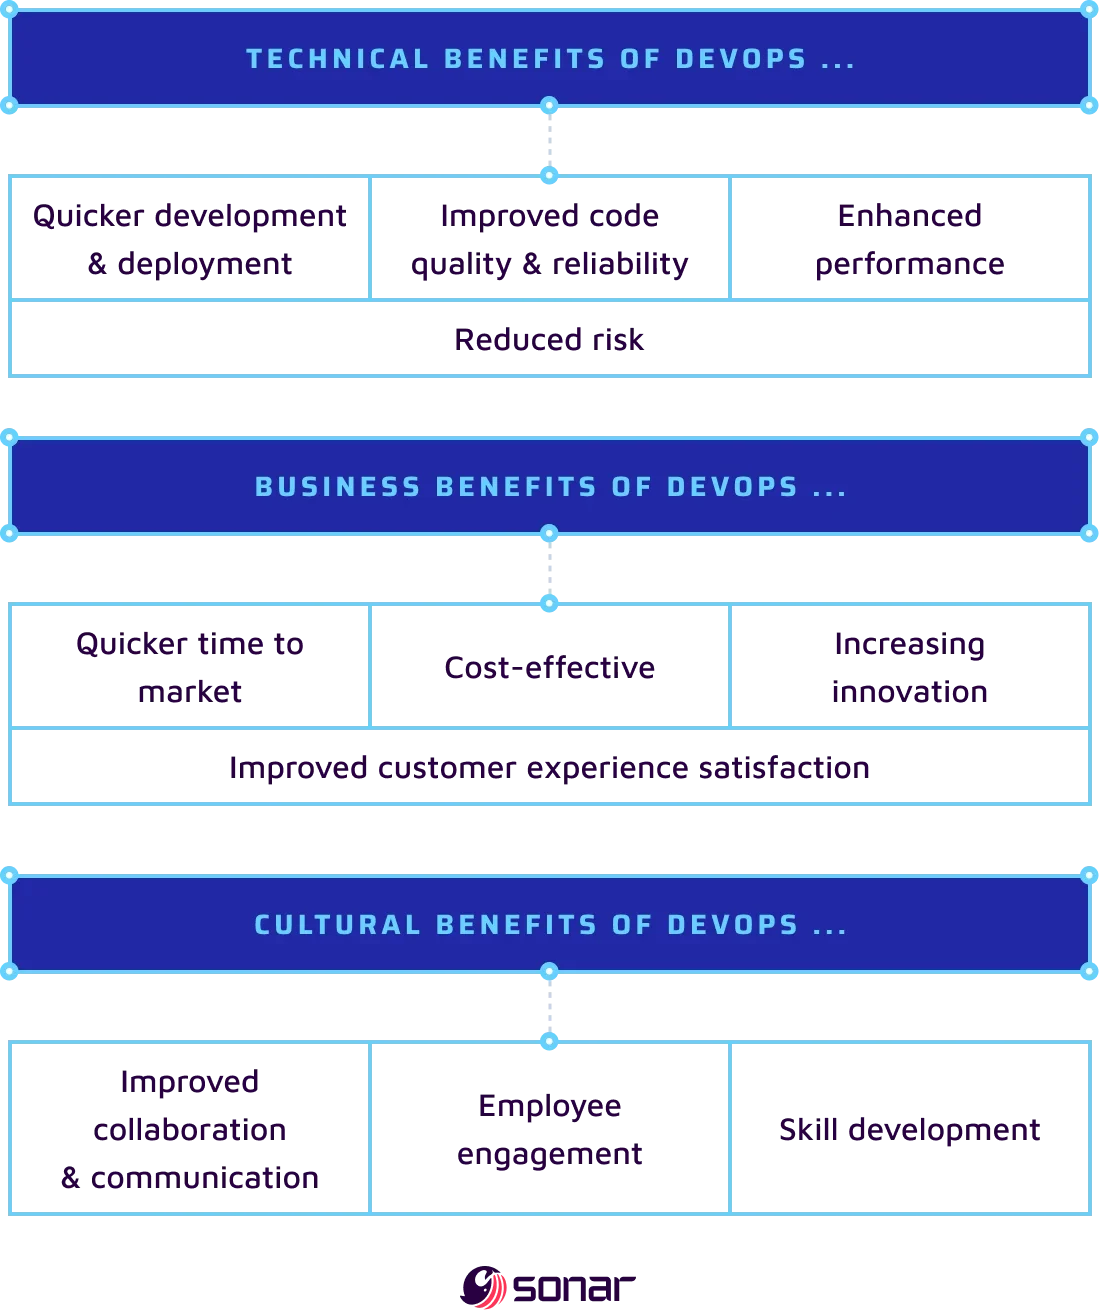 An image listing the technical, business and cultural benefits of DevOps. 